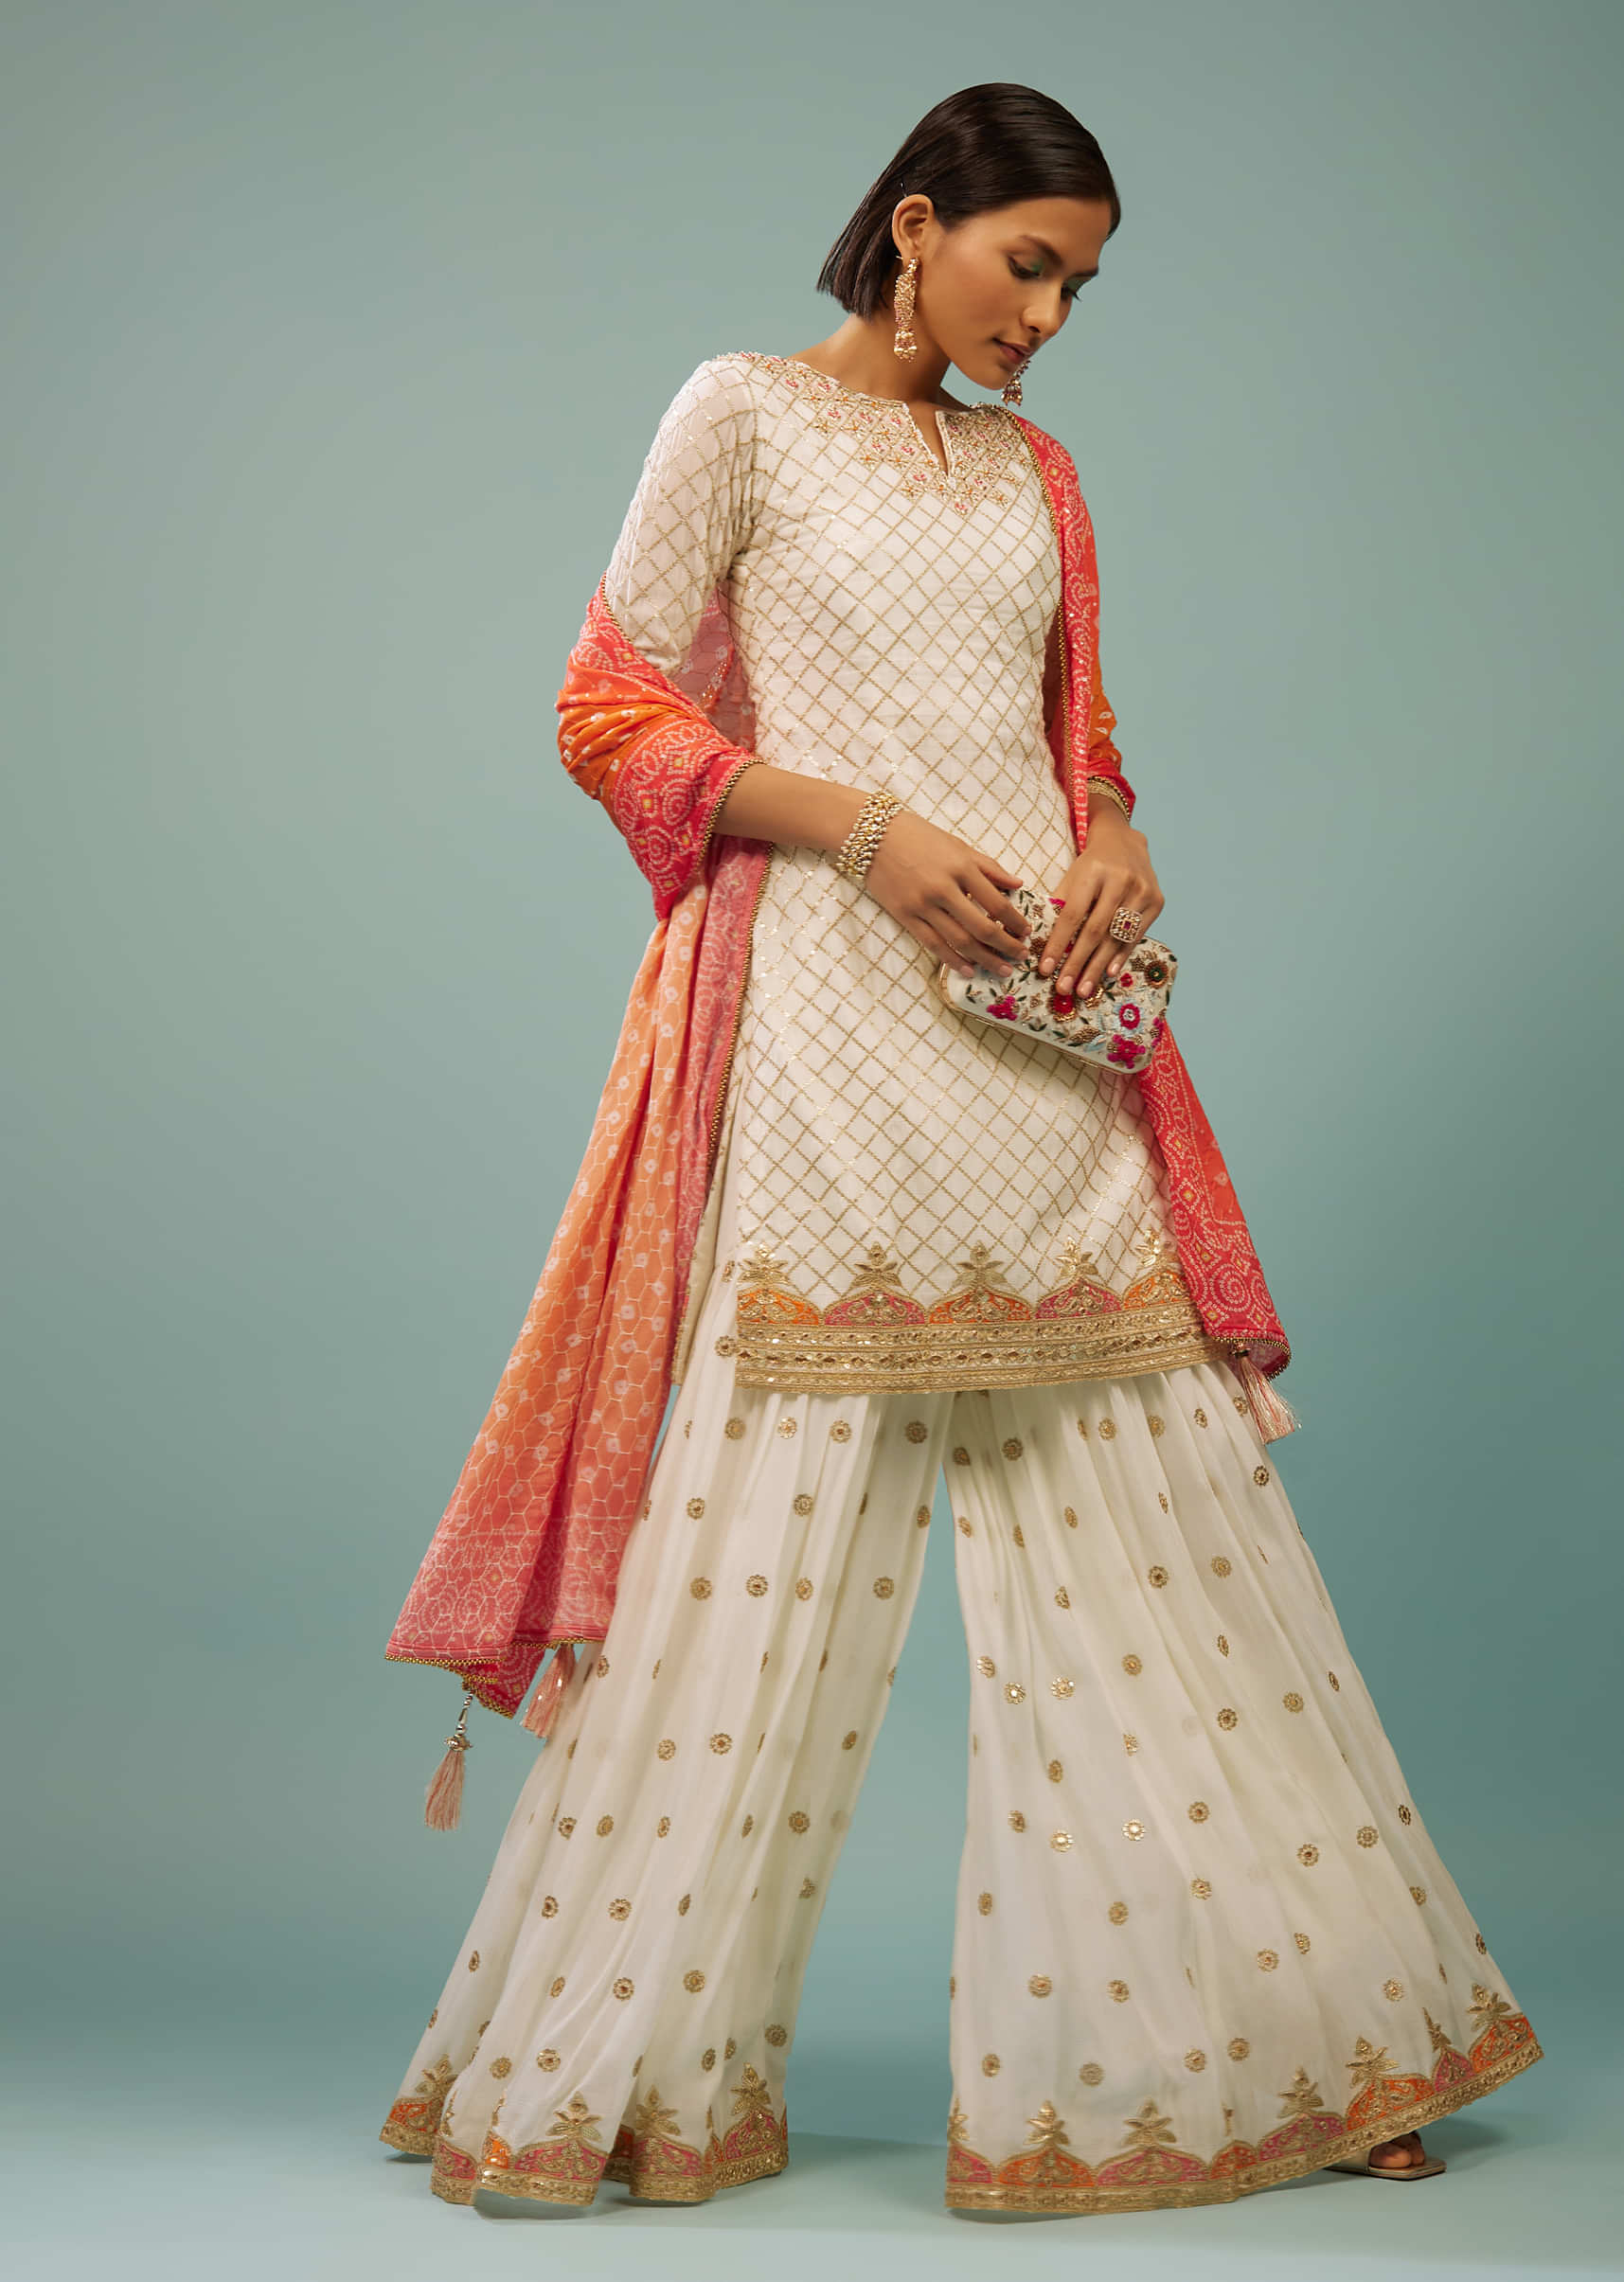 Kalki Cloud Dancer White Sharara Suit With Embroidery And Bandhani Dupatta